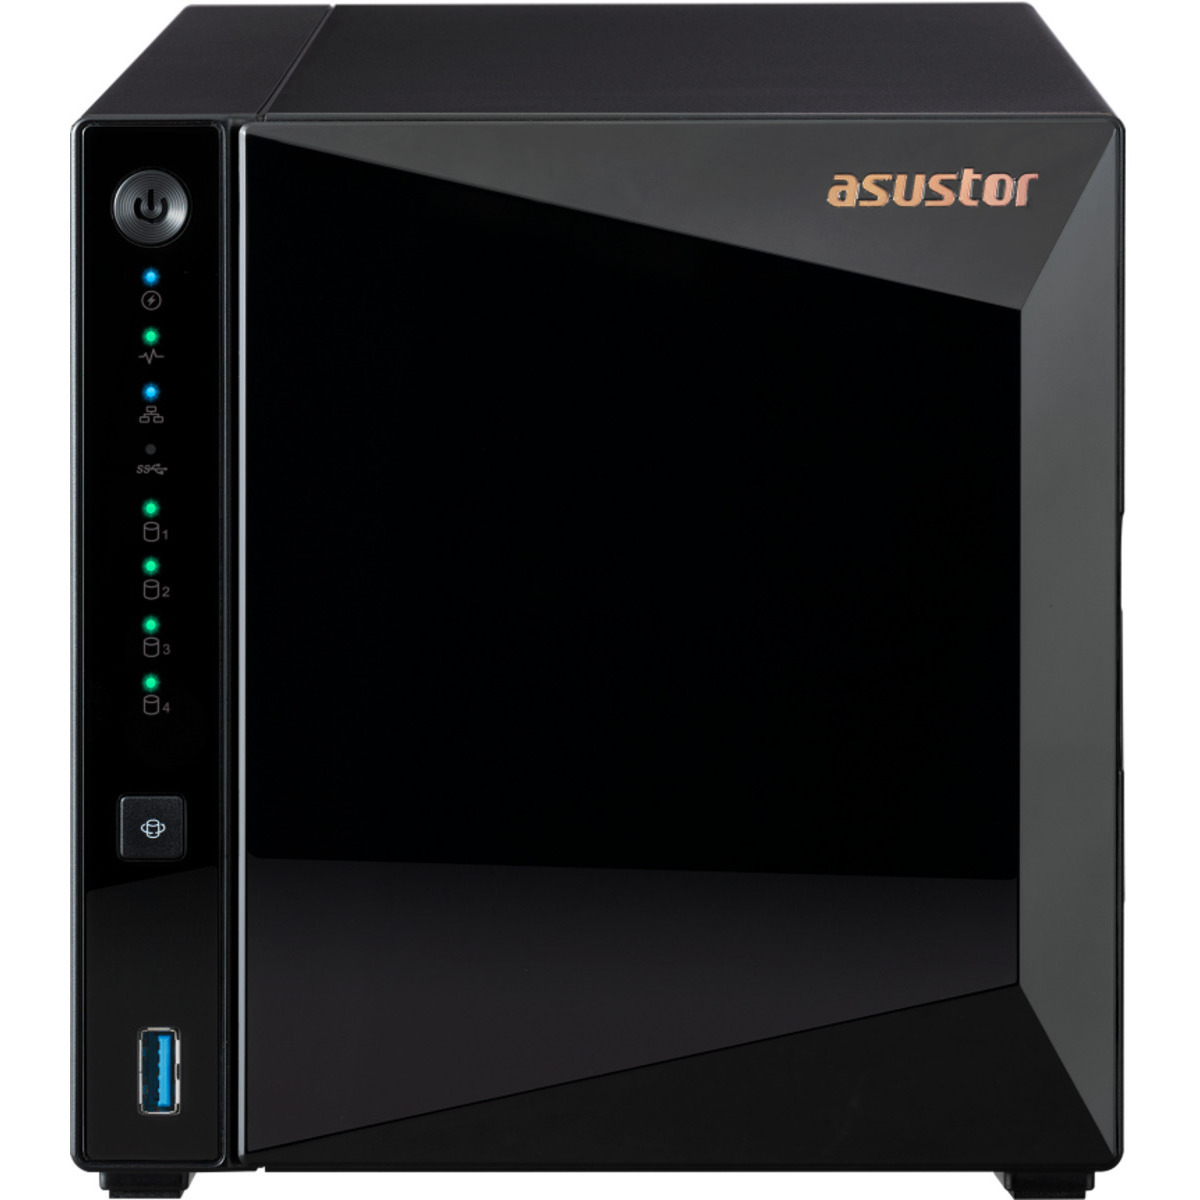 ASUSTOR DRIVESTOR 4 Pro Gen2 AS3304T v2 64tb 4-Bay Desktop Personal / Basic Home / Small Office NAS - Network Attached Storage Device 4x16tb Seagate IronWolf ST16000VN001 3.5 7200rpm SATA 6Gb/s HDD NAS Class Drives Installed - Burn-In Tested - ON SALE DRIVESTOR 4 Pro Gen2 AS3304T v2